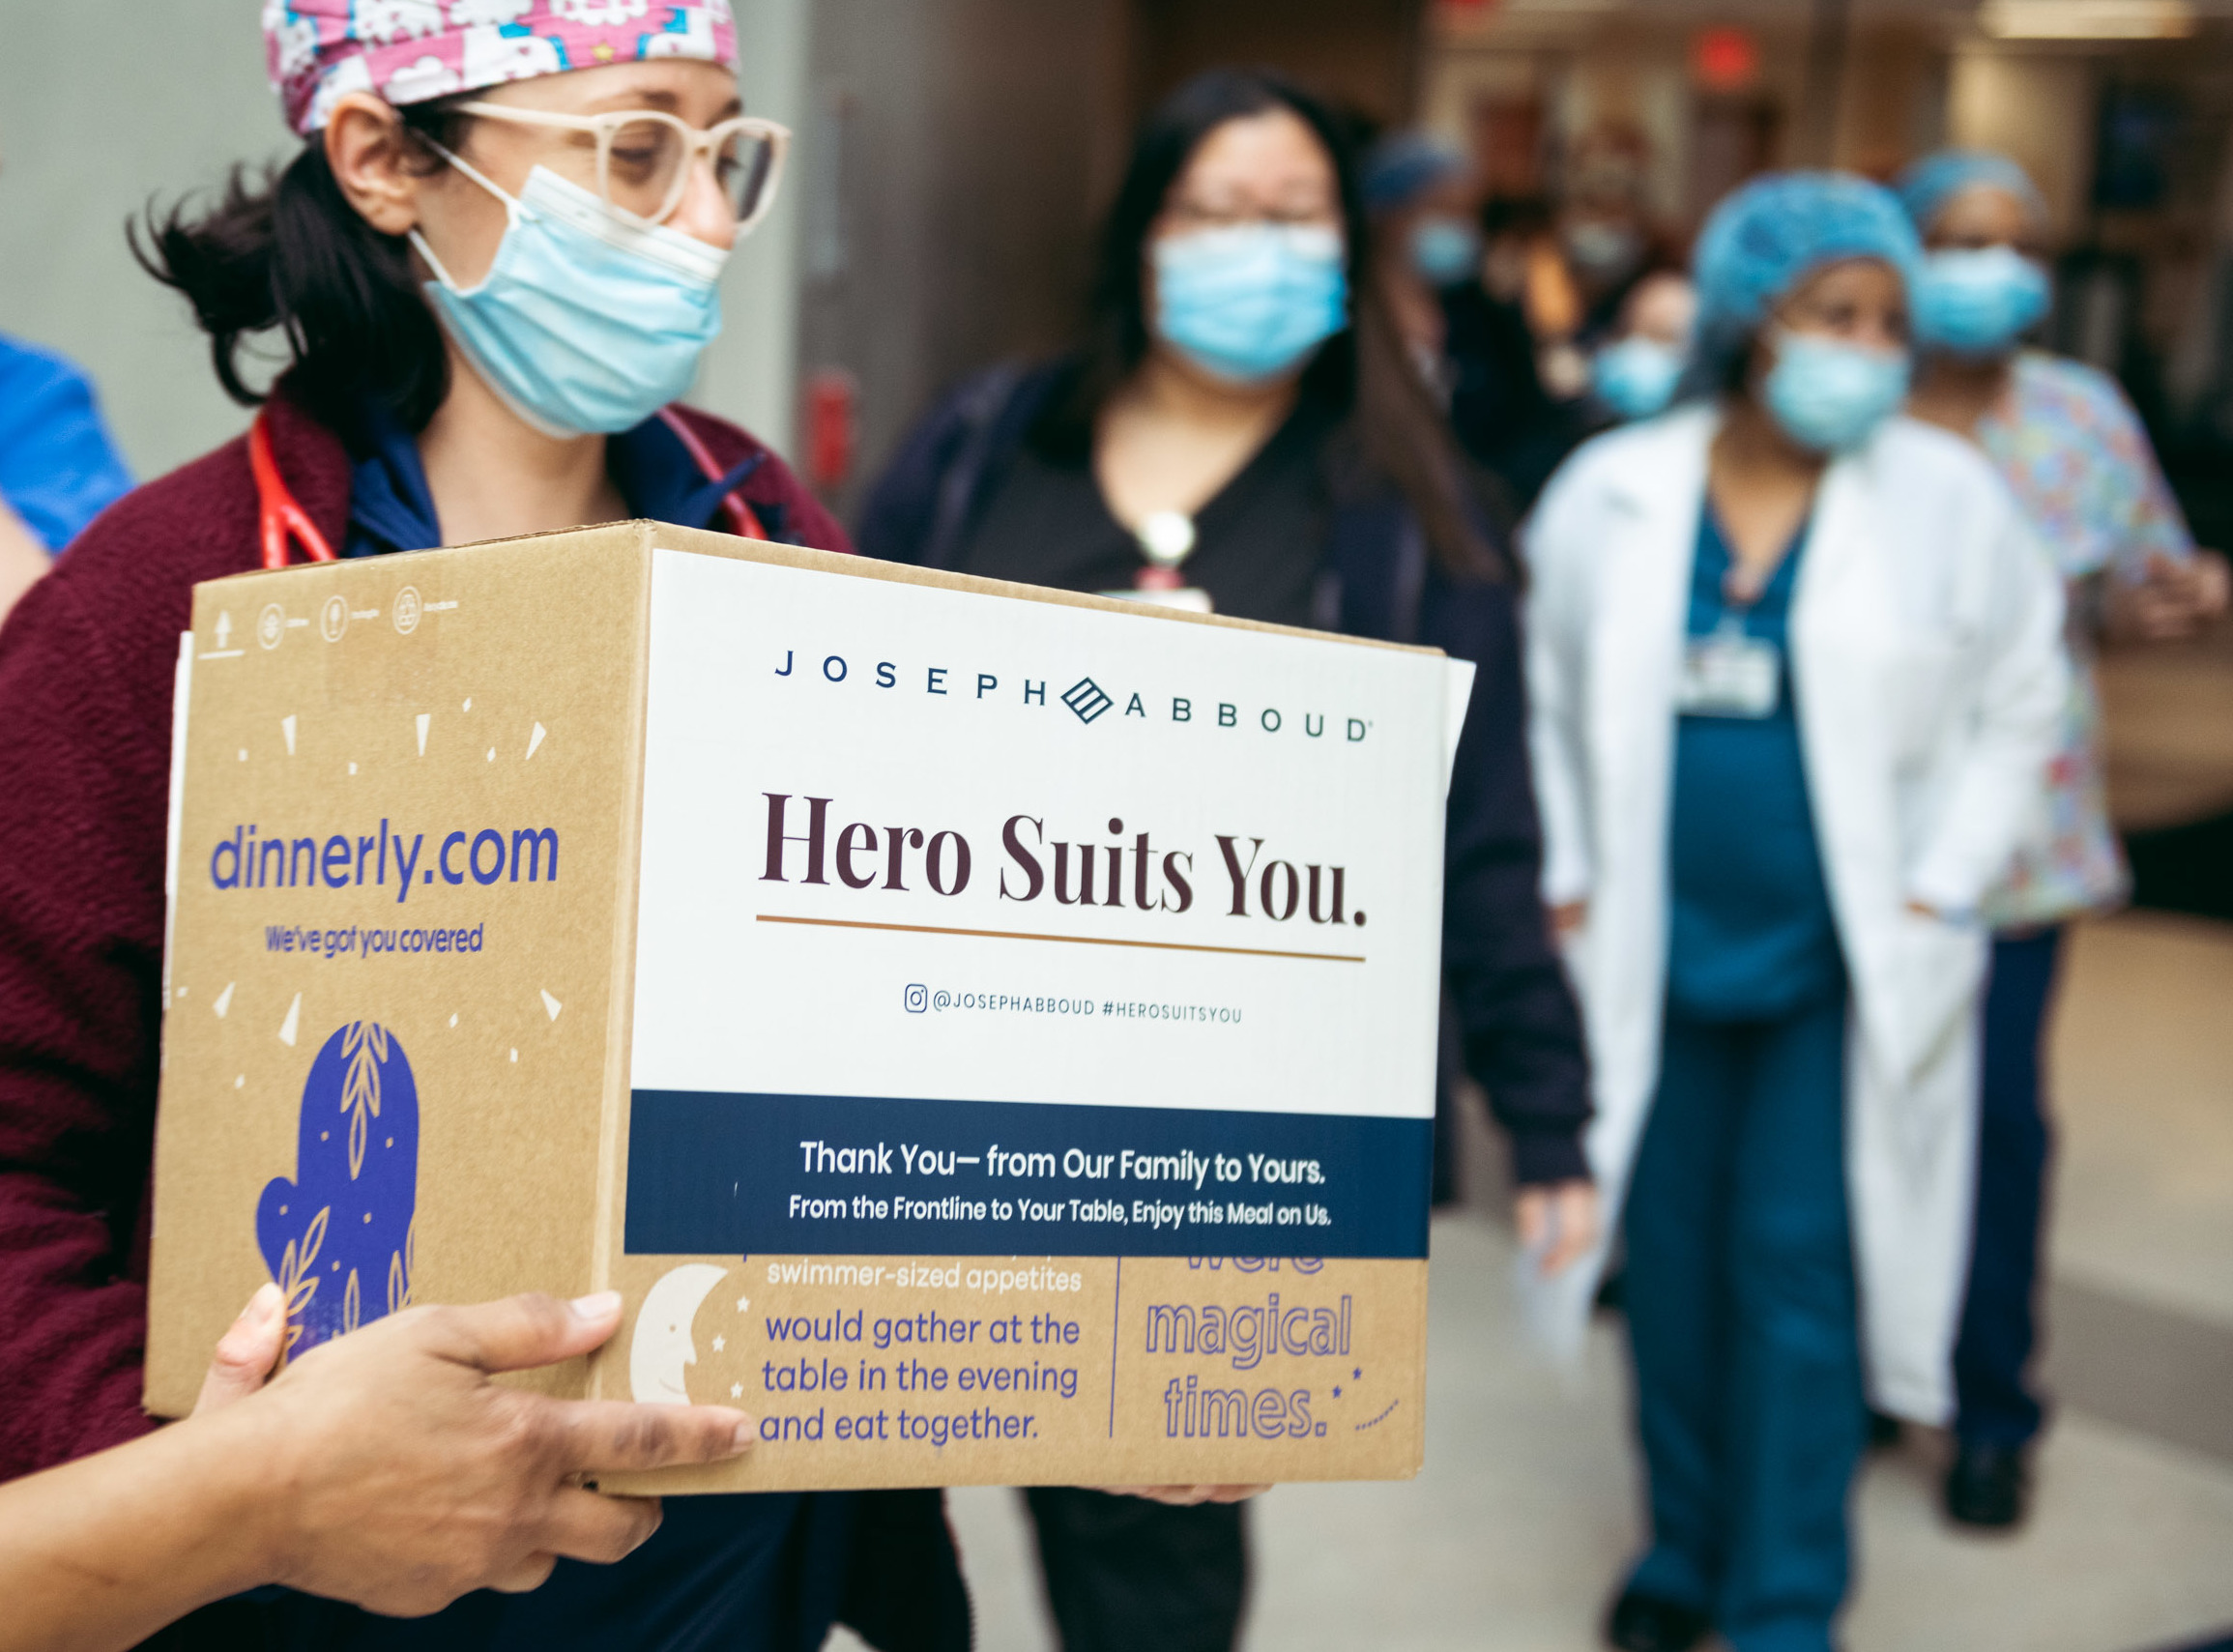 Hospital health care worker wearing mask and ppe receives food meal kit box as other nurses and doctors stand in line. 